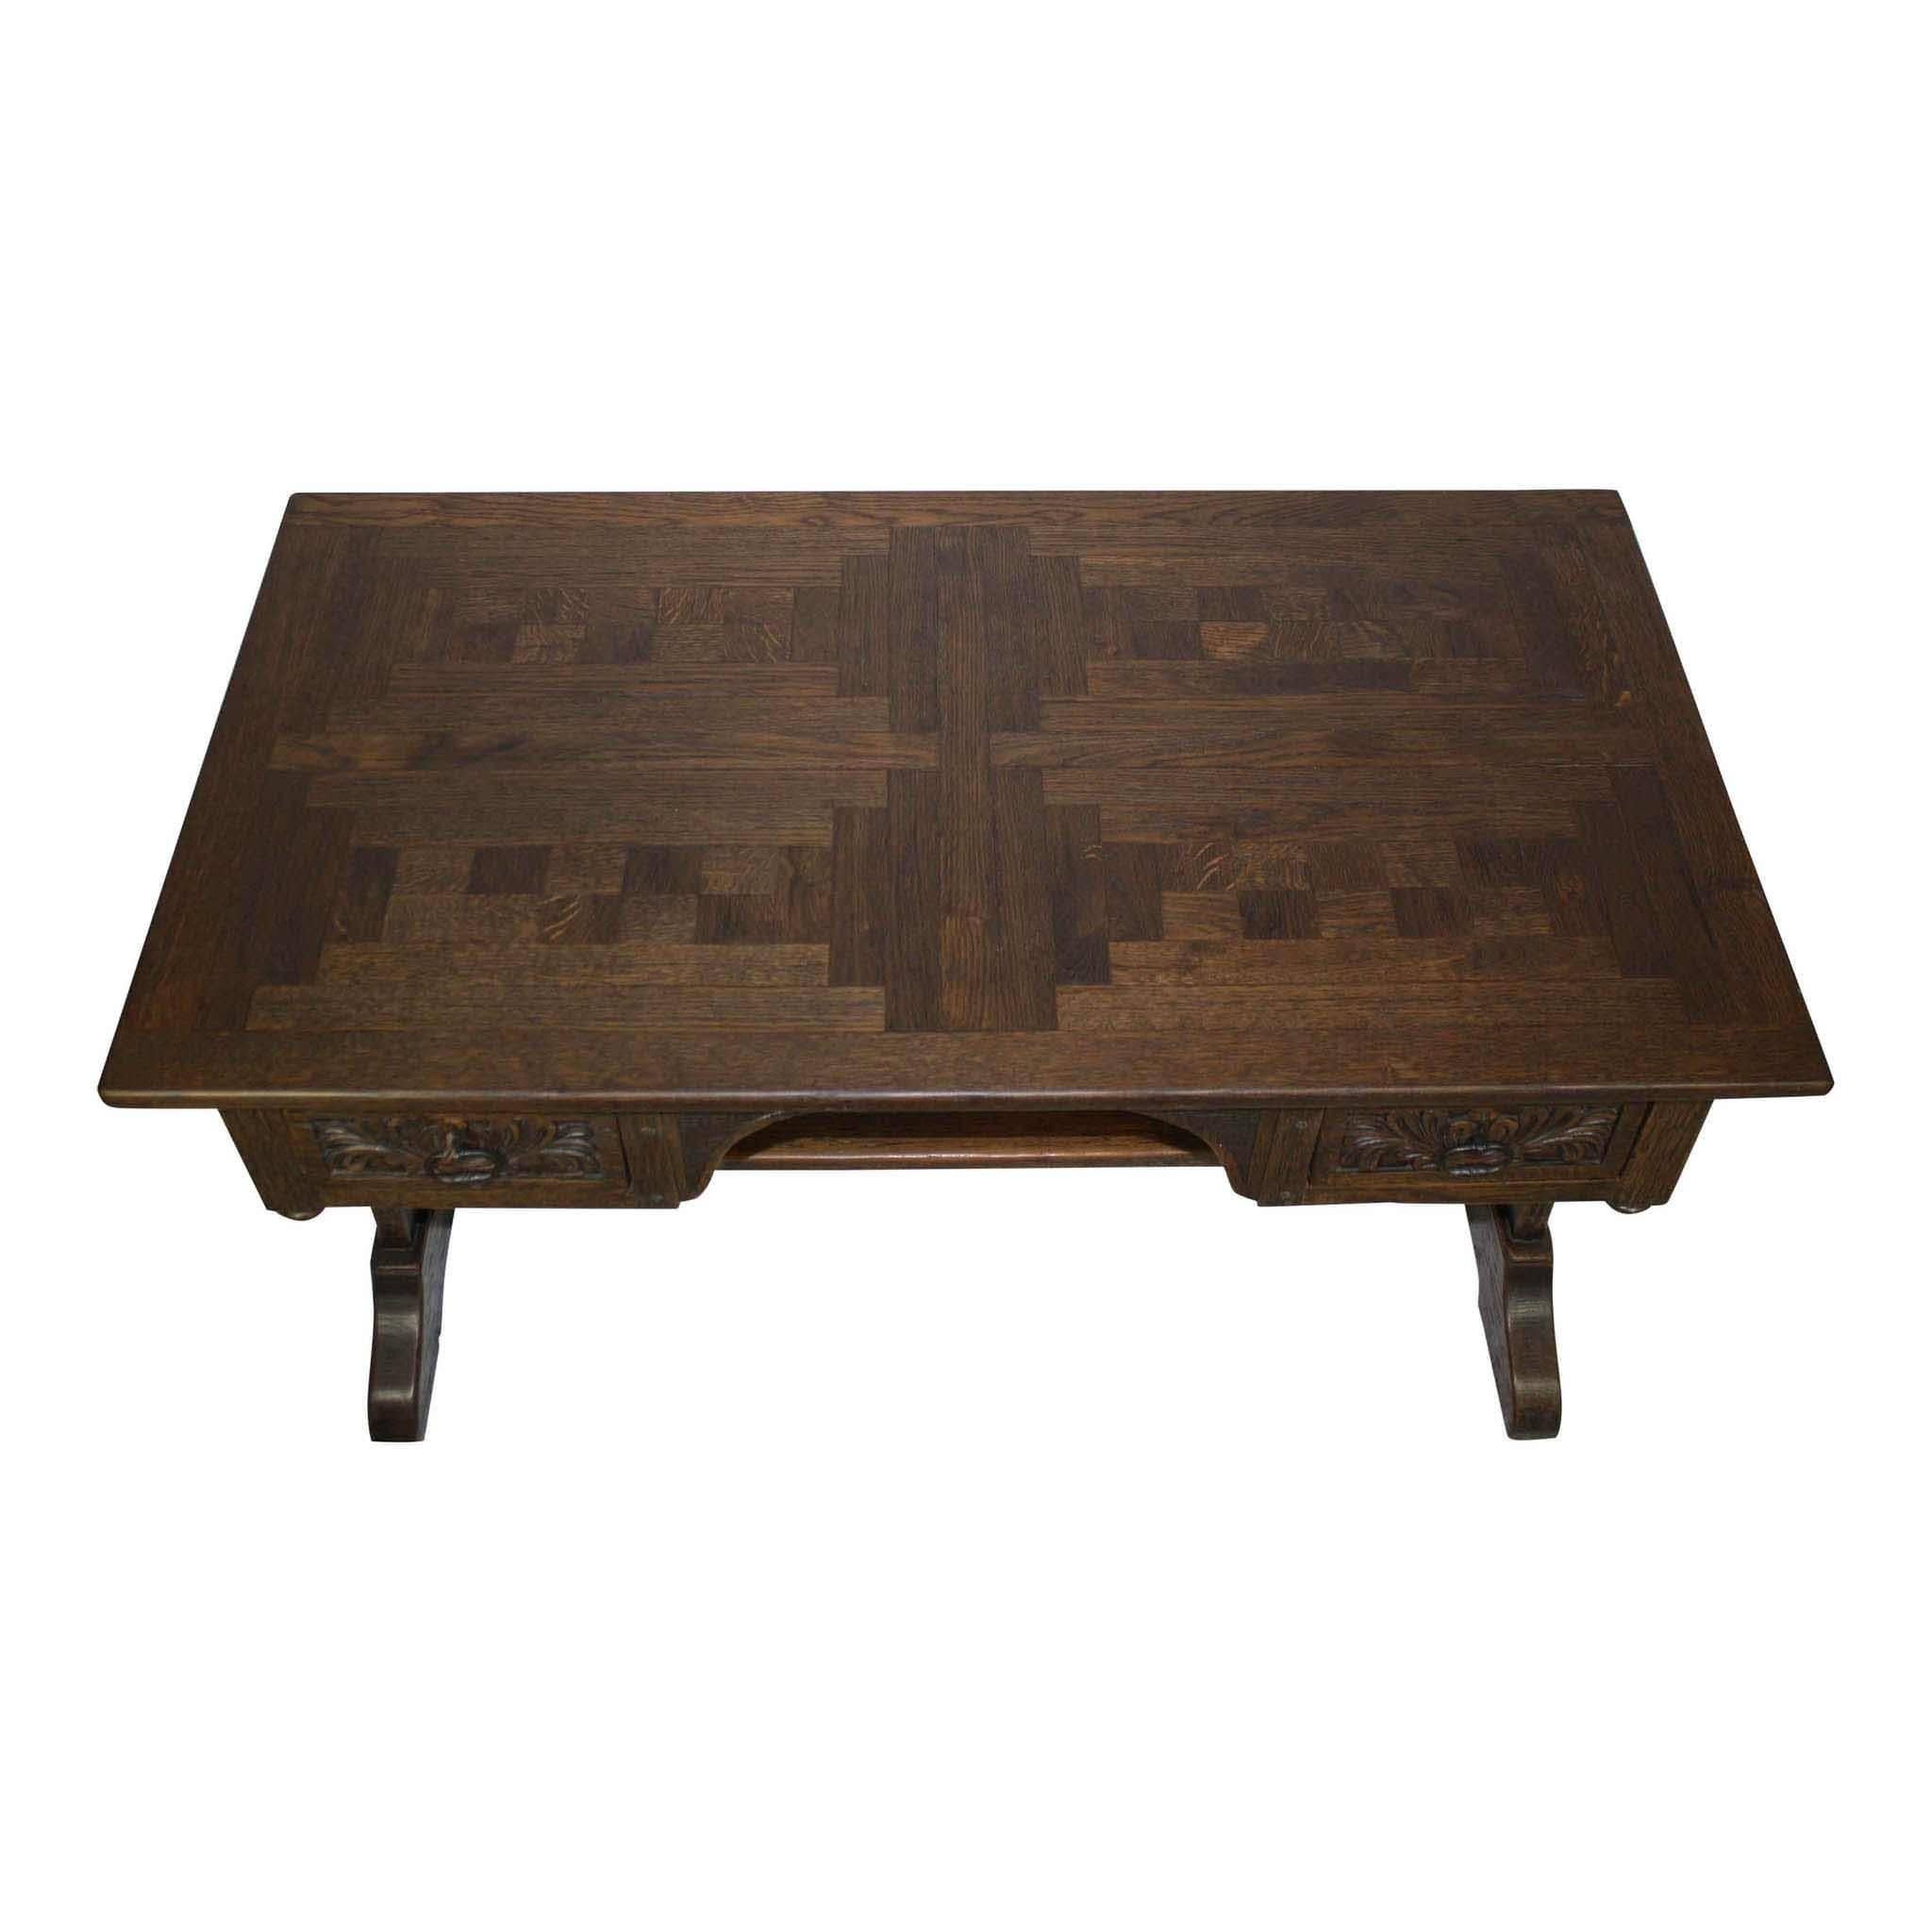 The cutouts on each side of this desk allow for two people to sit on either side. The desktop is beautifully veneered with a woven or braided pattern. A carved apron with decorative finials completes the piece.